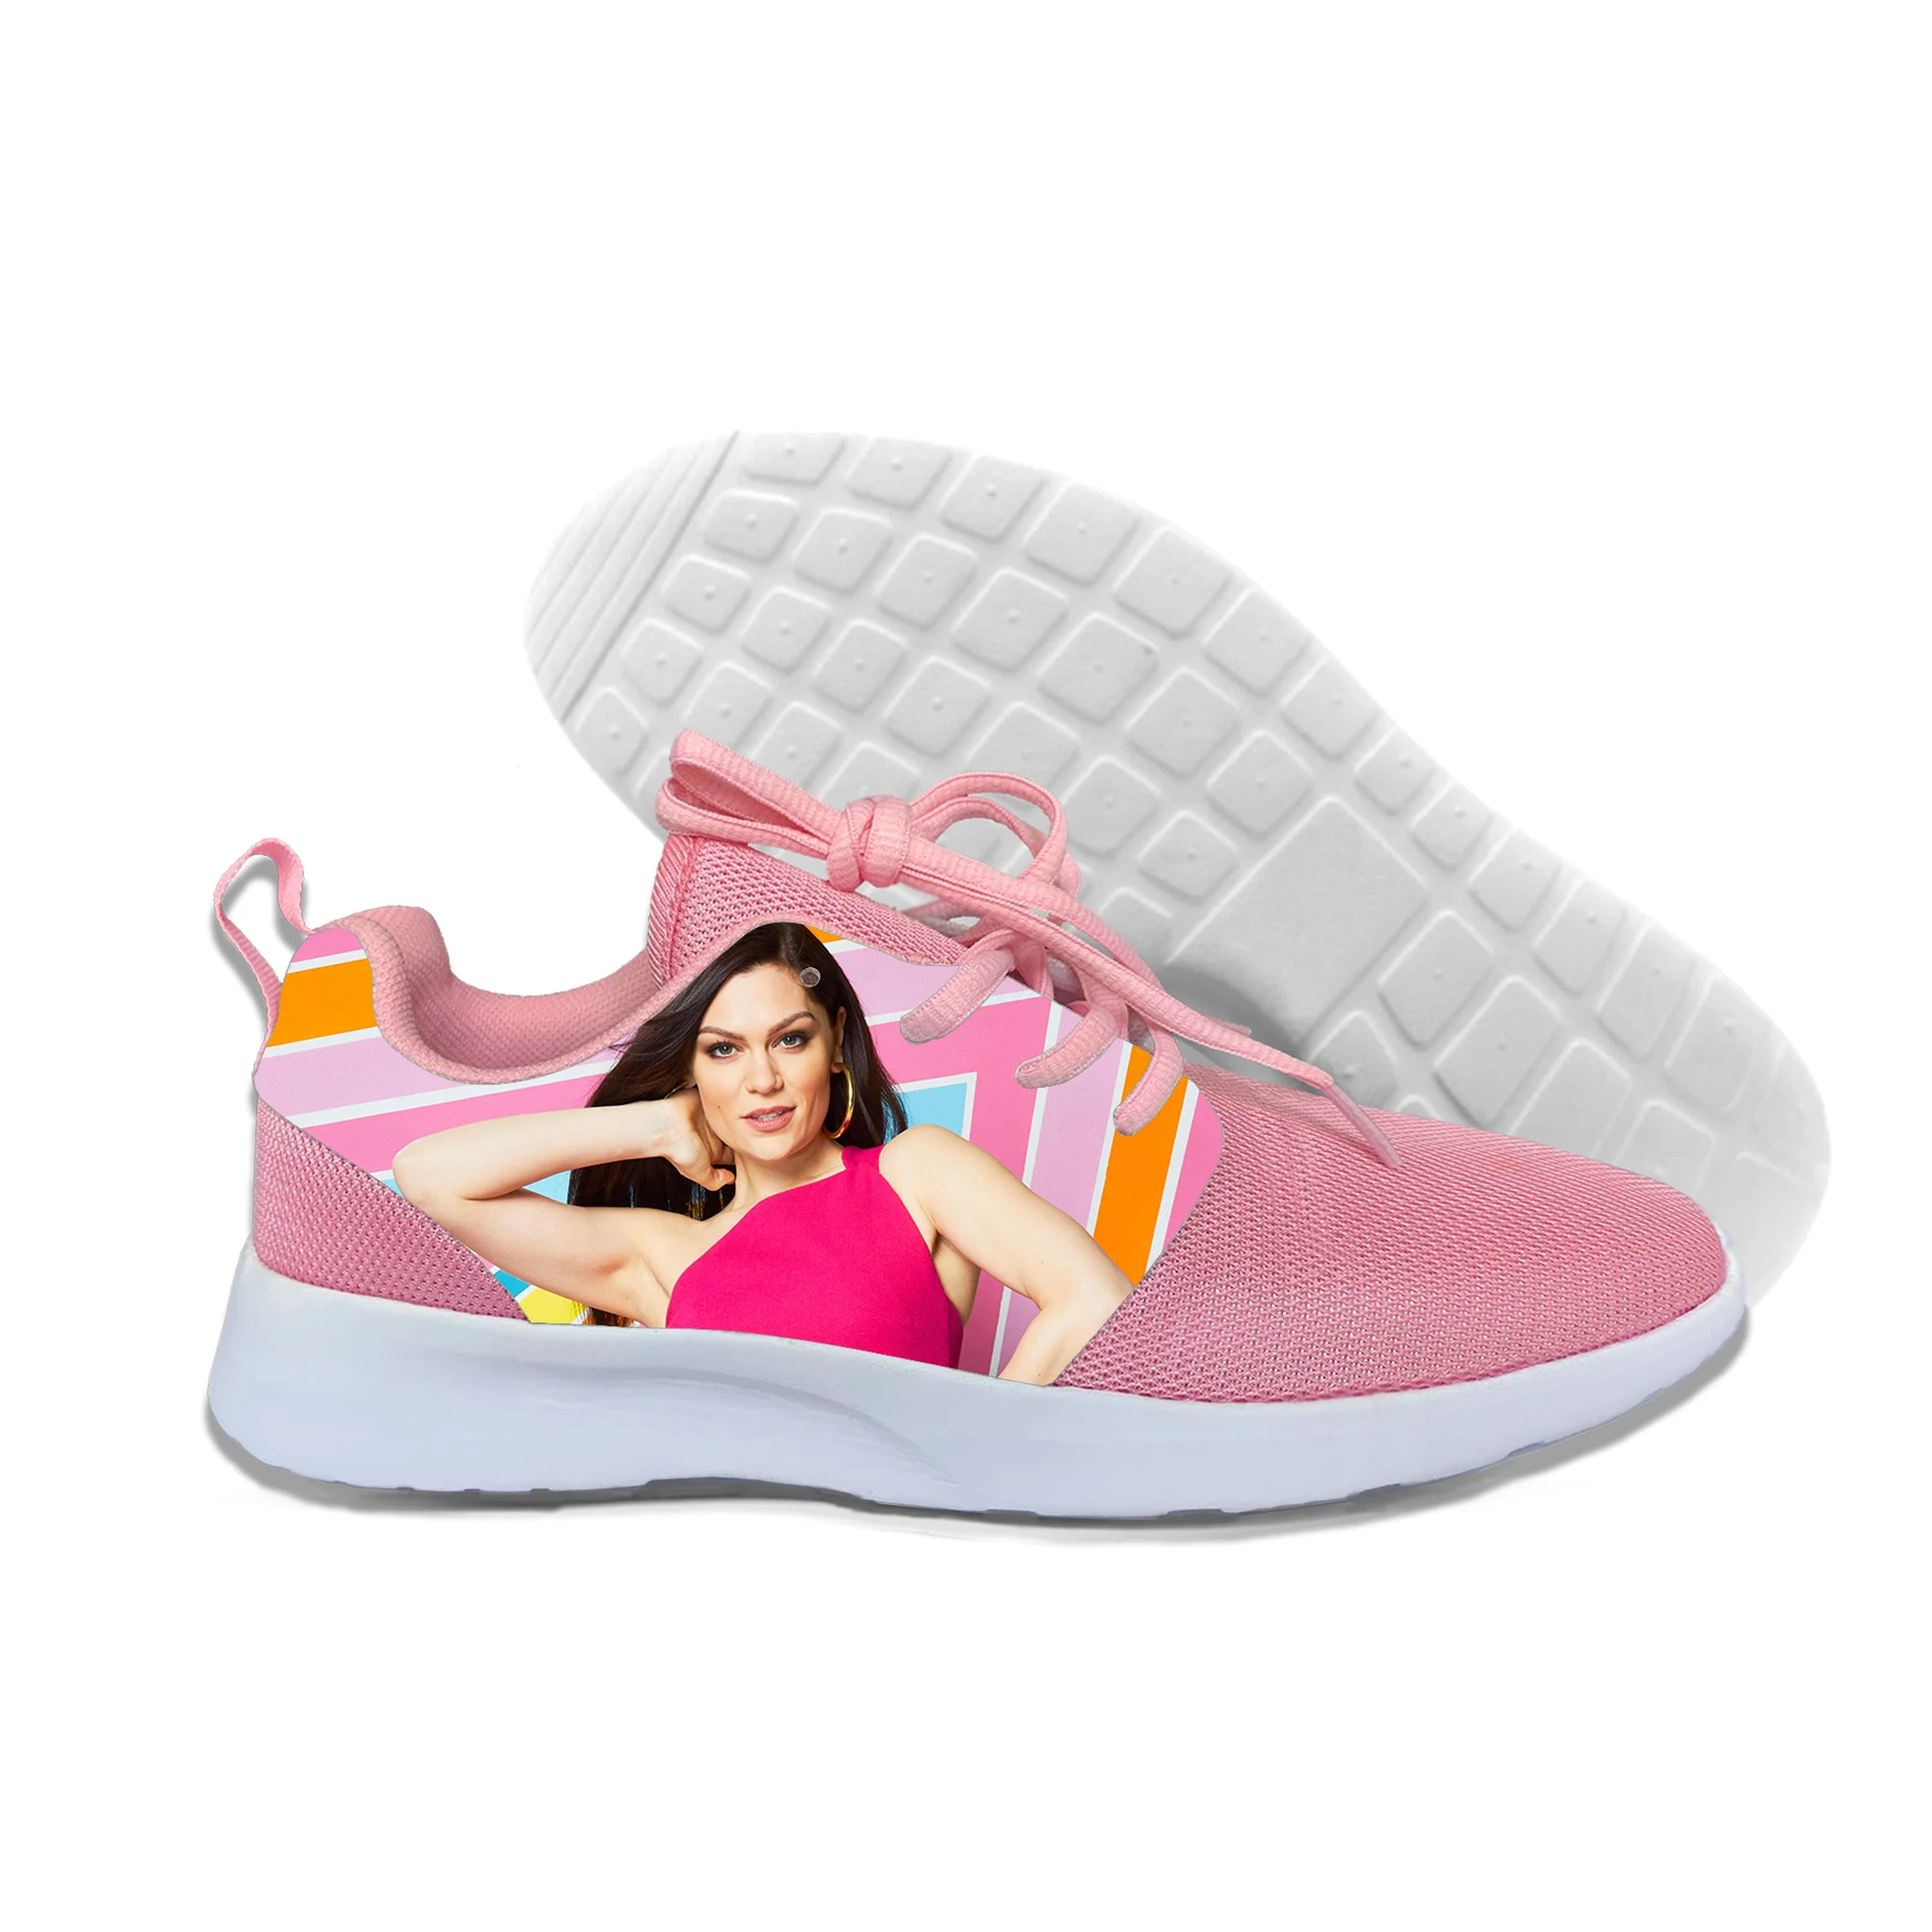 

Jessie J Music 2021Breathable Shoes Flat Slip on Platform Tenis for Women Men Mesh Sock Sneakers Shoes Zapatillas Aire Mujer